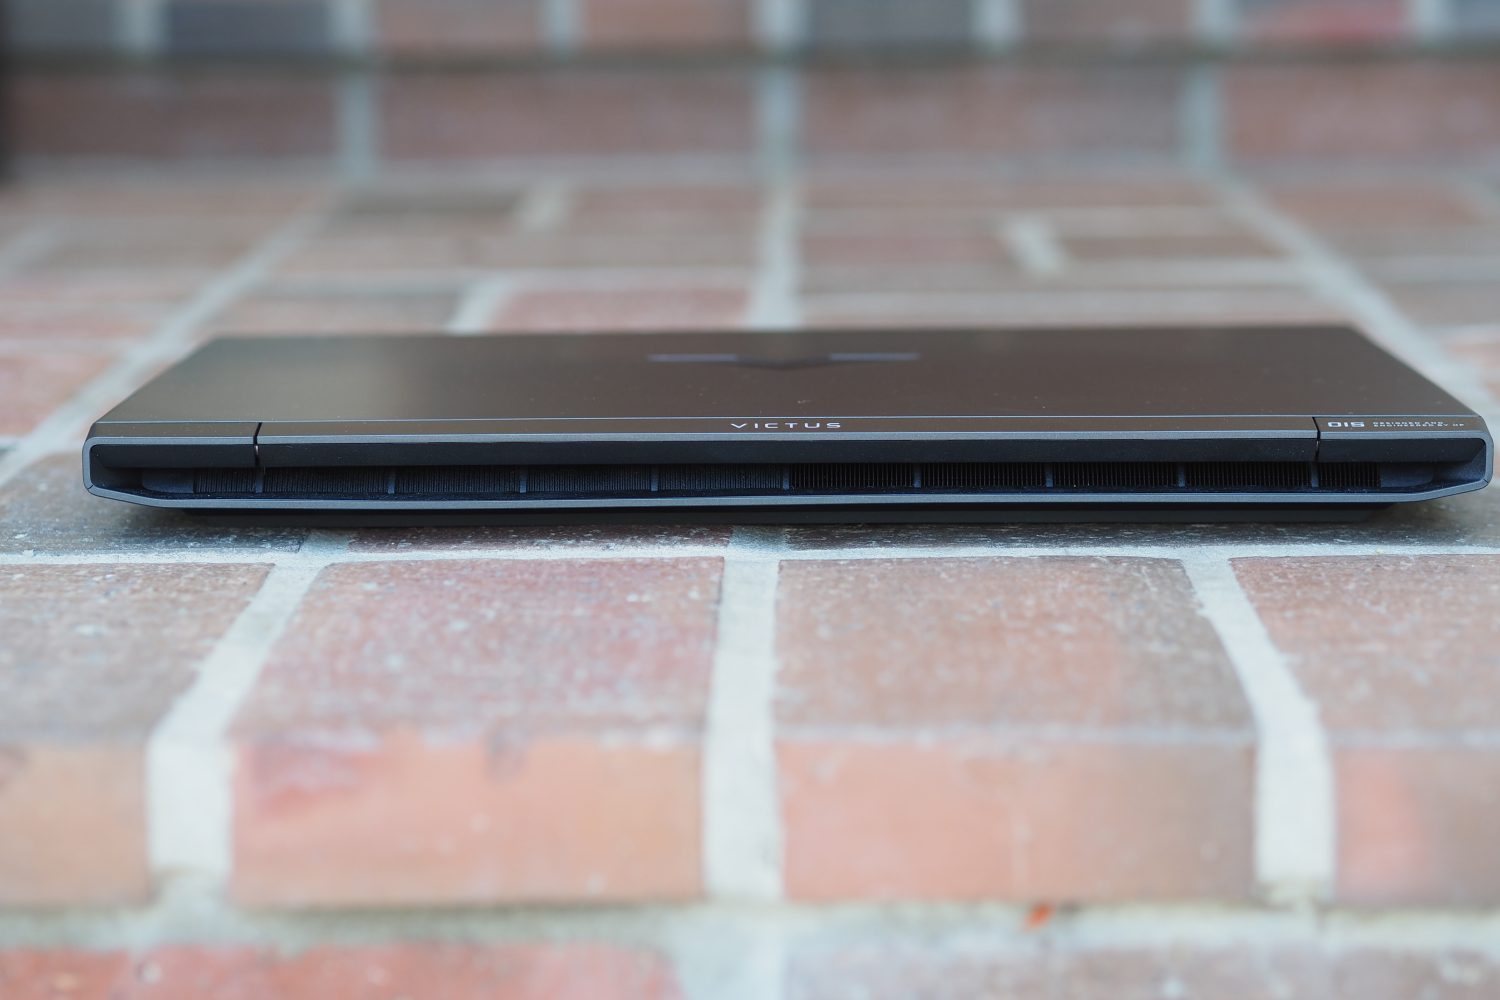 HP Victus 15 Review: A Standard Gaming Laptop - MySmartPrice